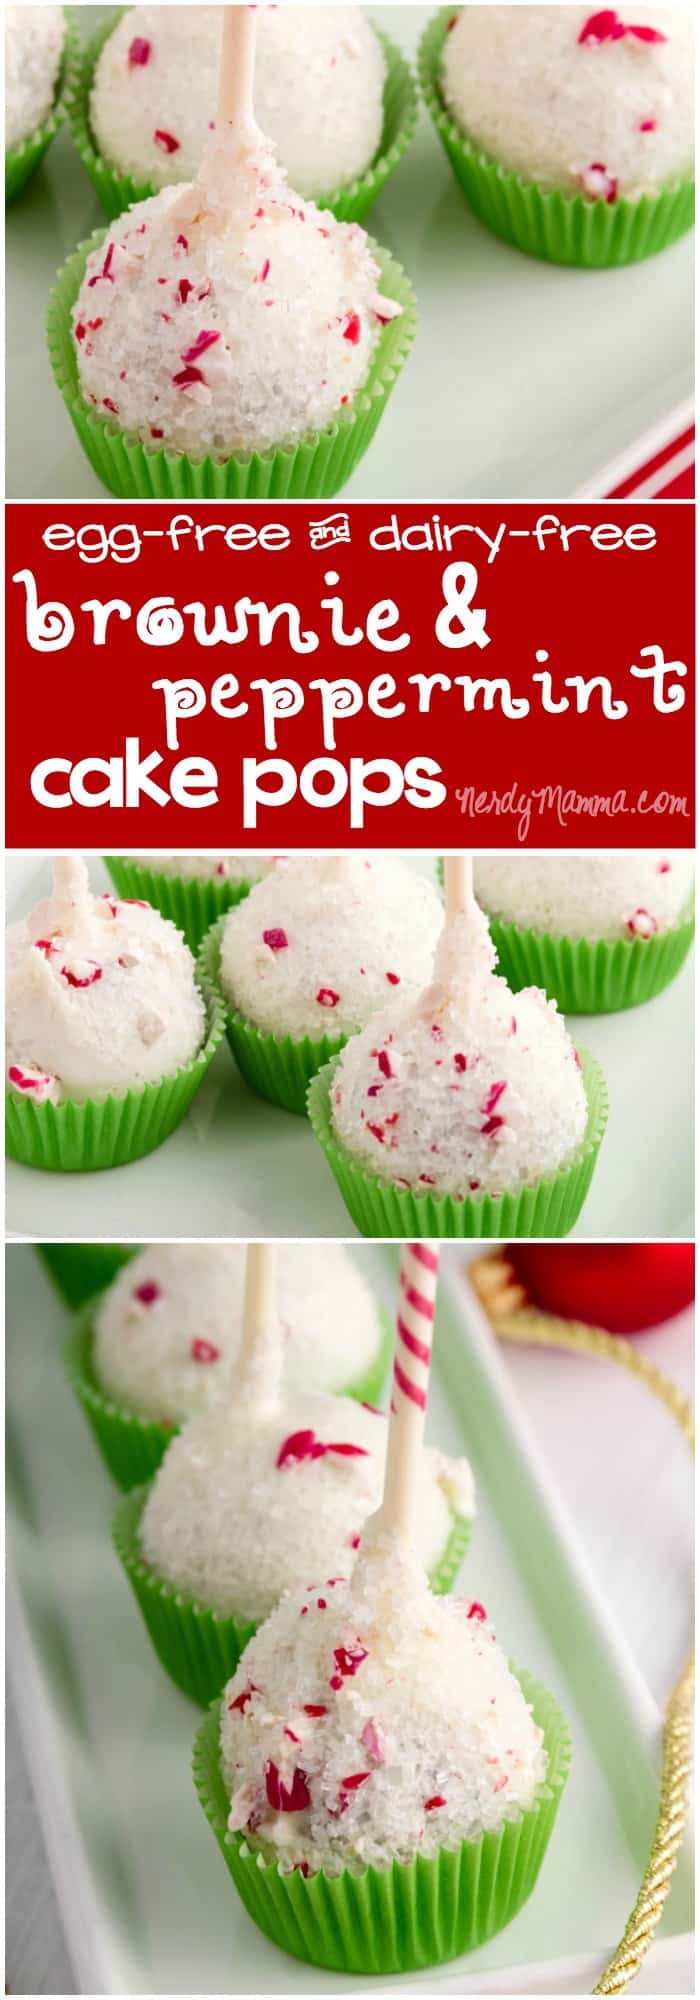 I love how easy these brownie & peppermint cake pops came together. I mean, eggless and dairy-free recipes aren't always this easy--or delicious!